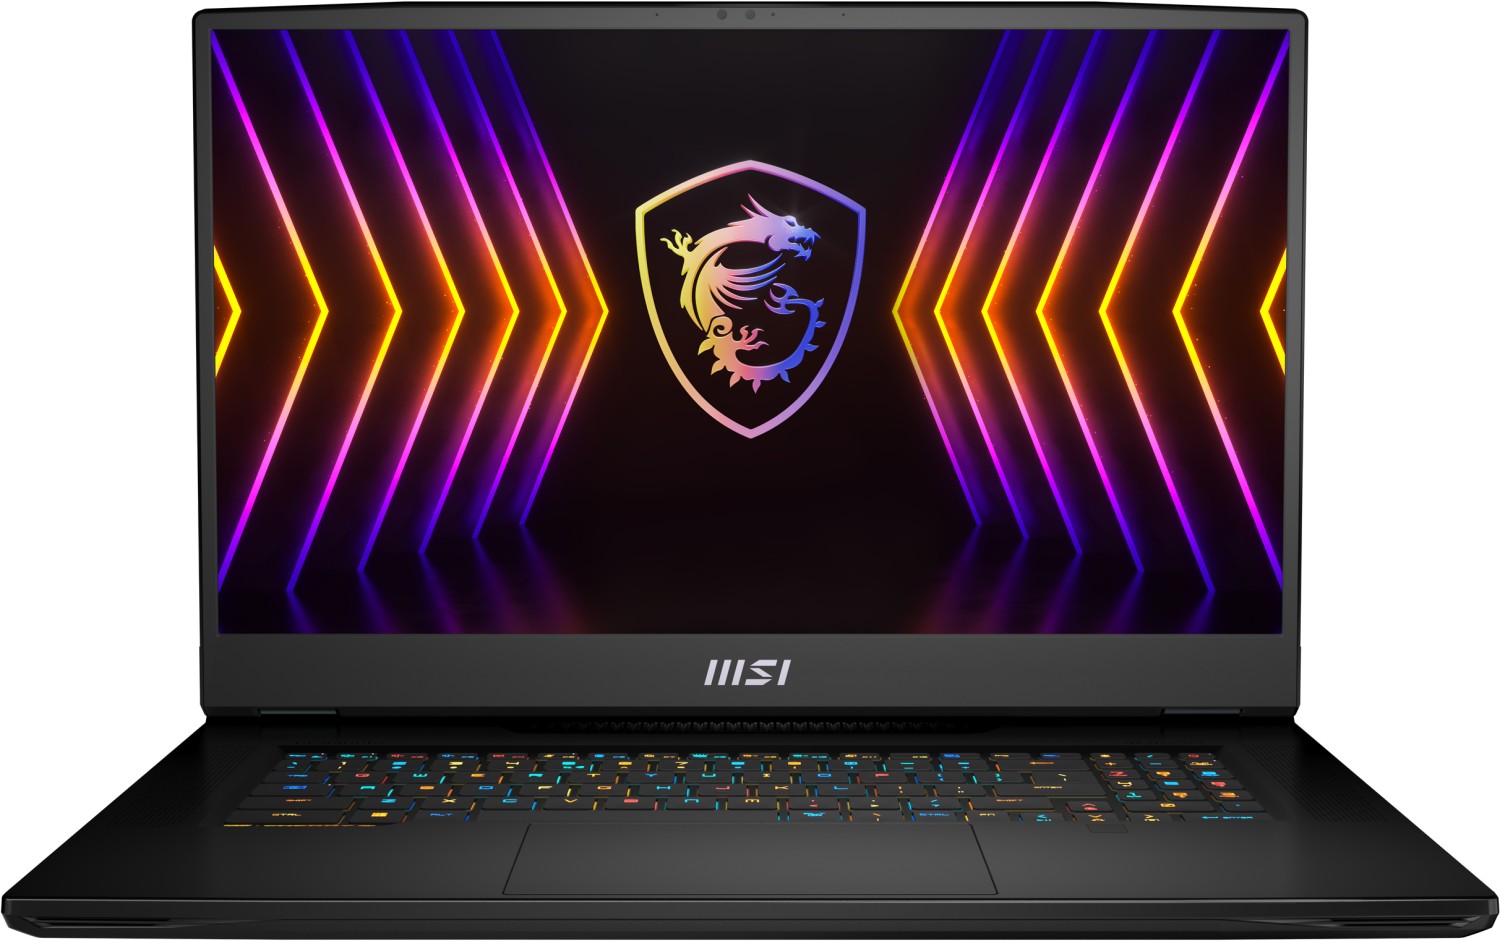 MSI GT77: The Sexiest Gaming Laptop You'll Ever Lay Your Eyes On